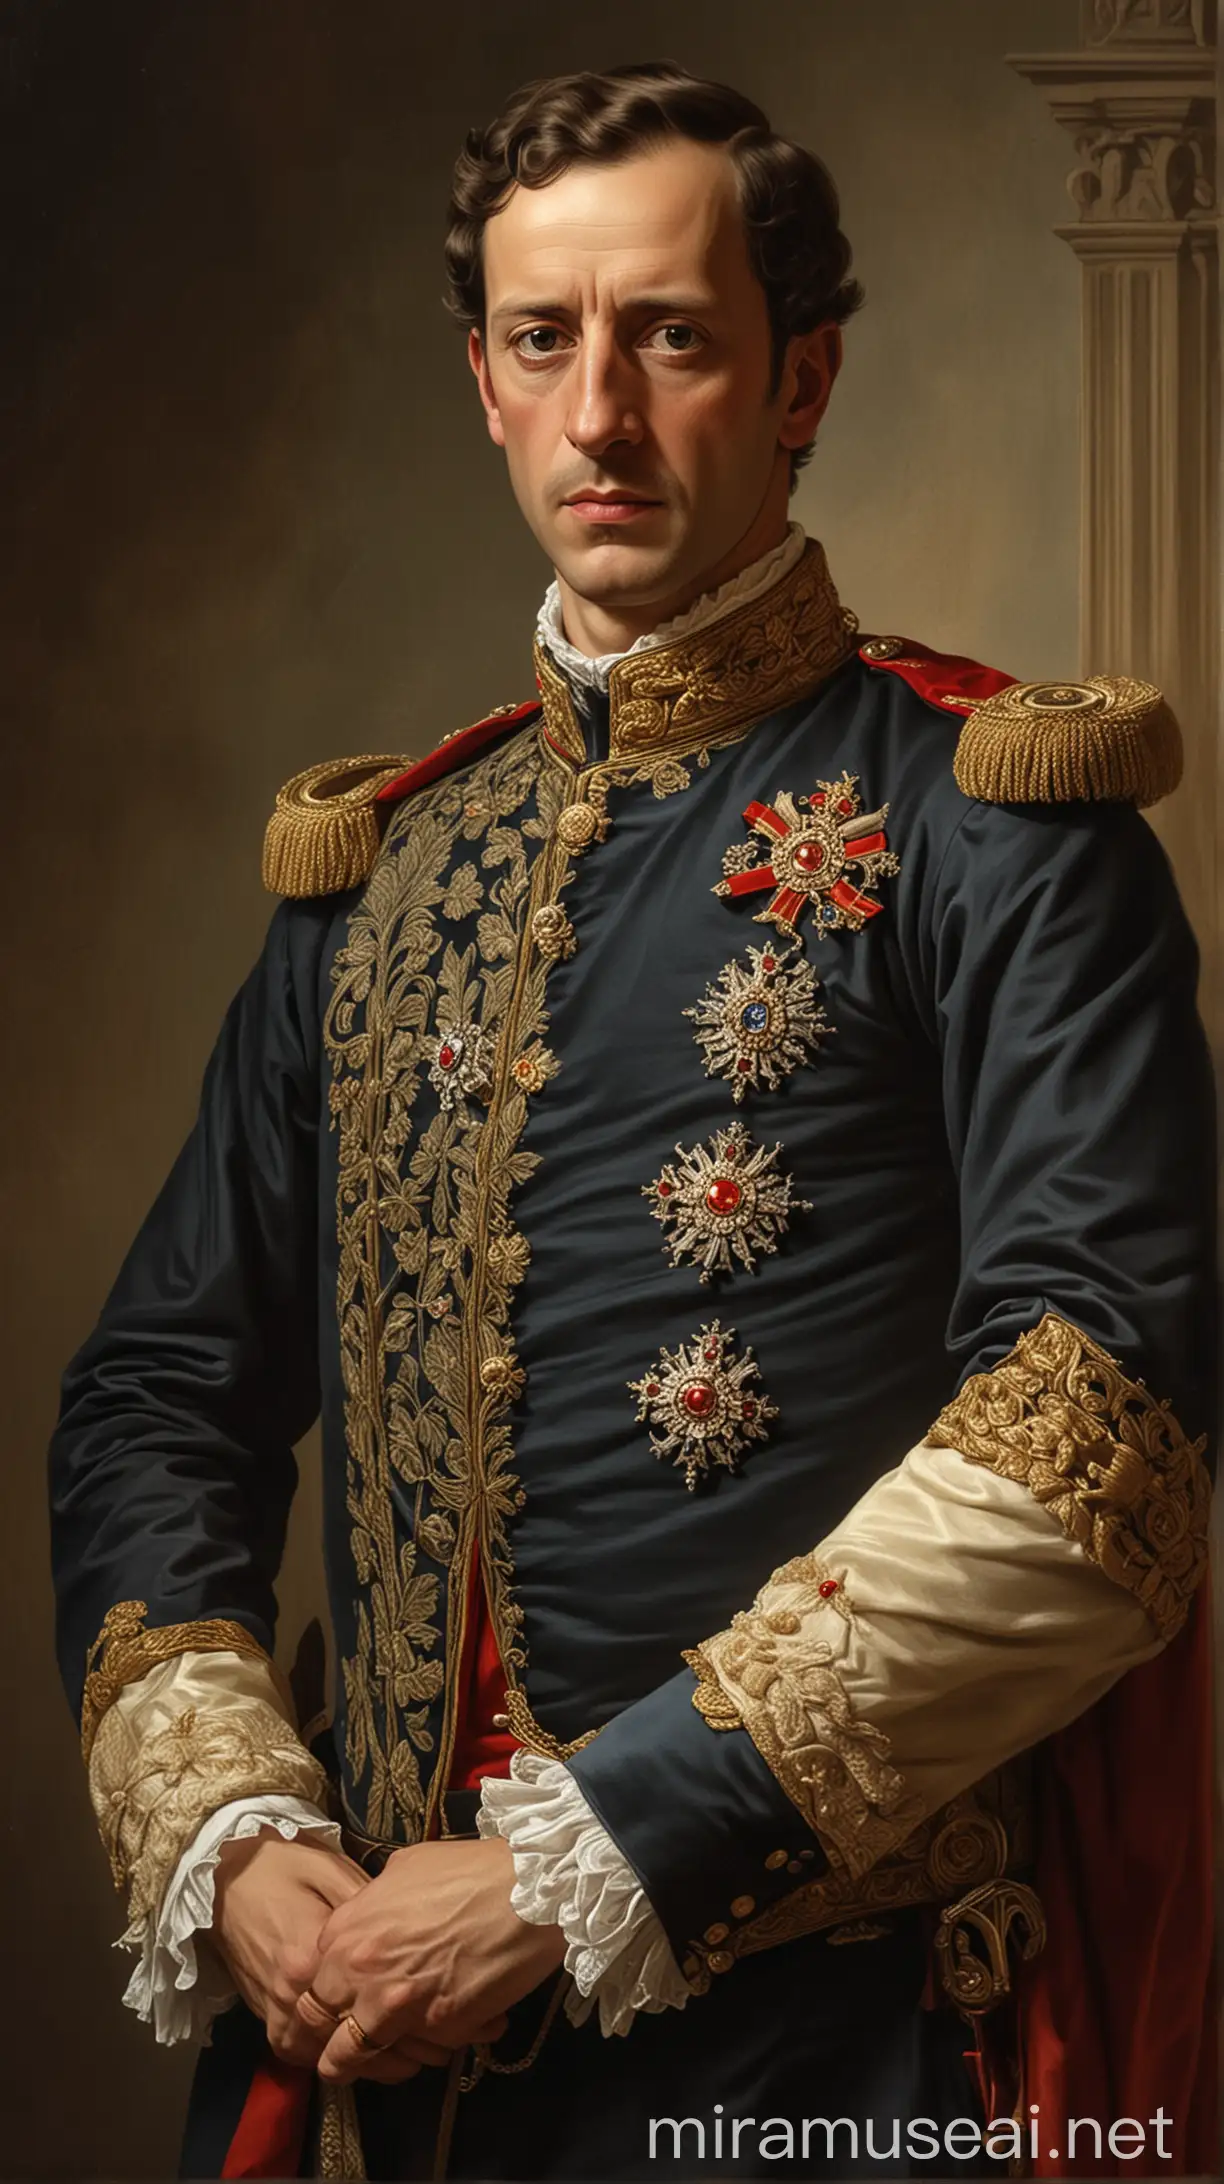 Portrait of Ferdinand VII of Spain Blending Historical Accuracy with Endowment Legends